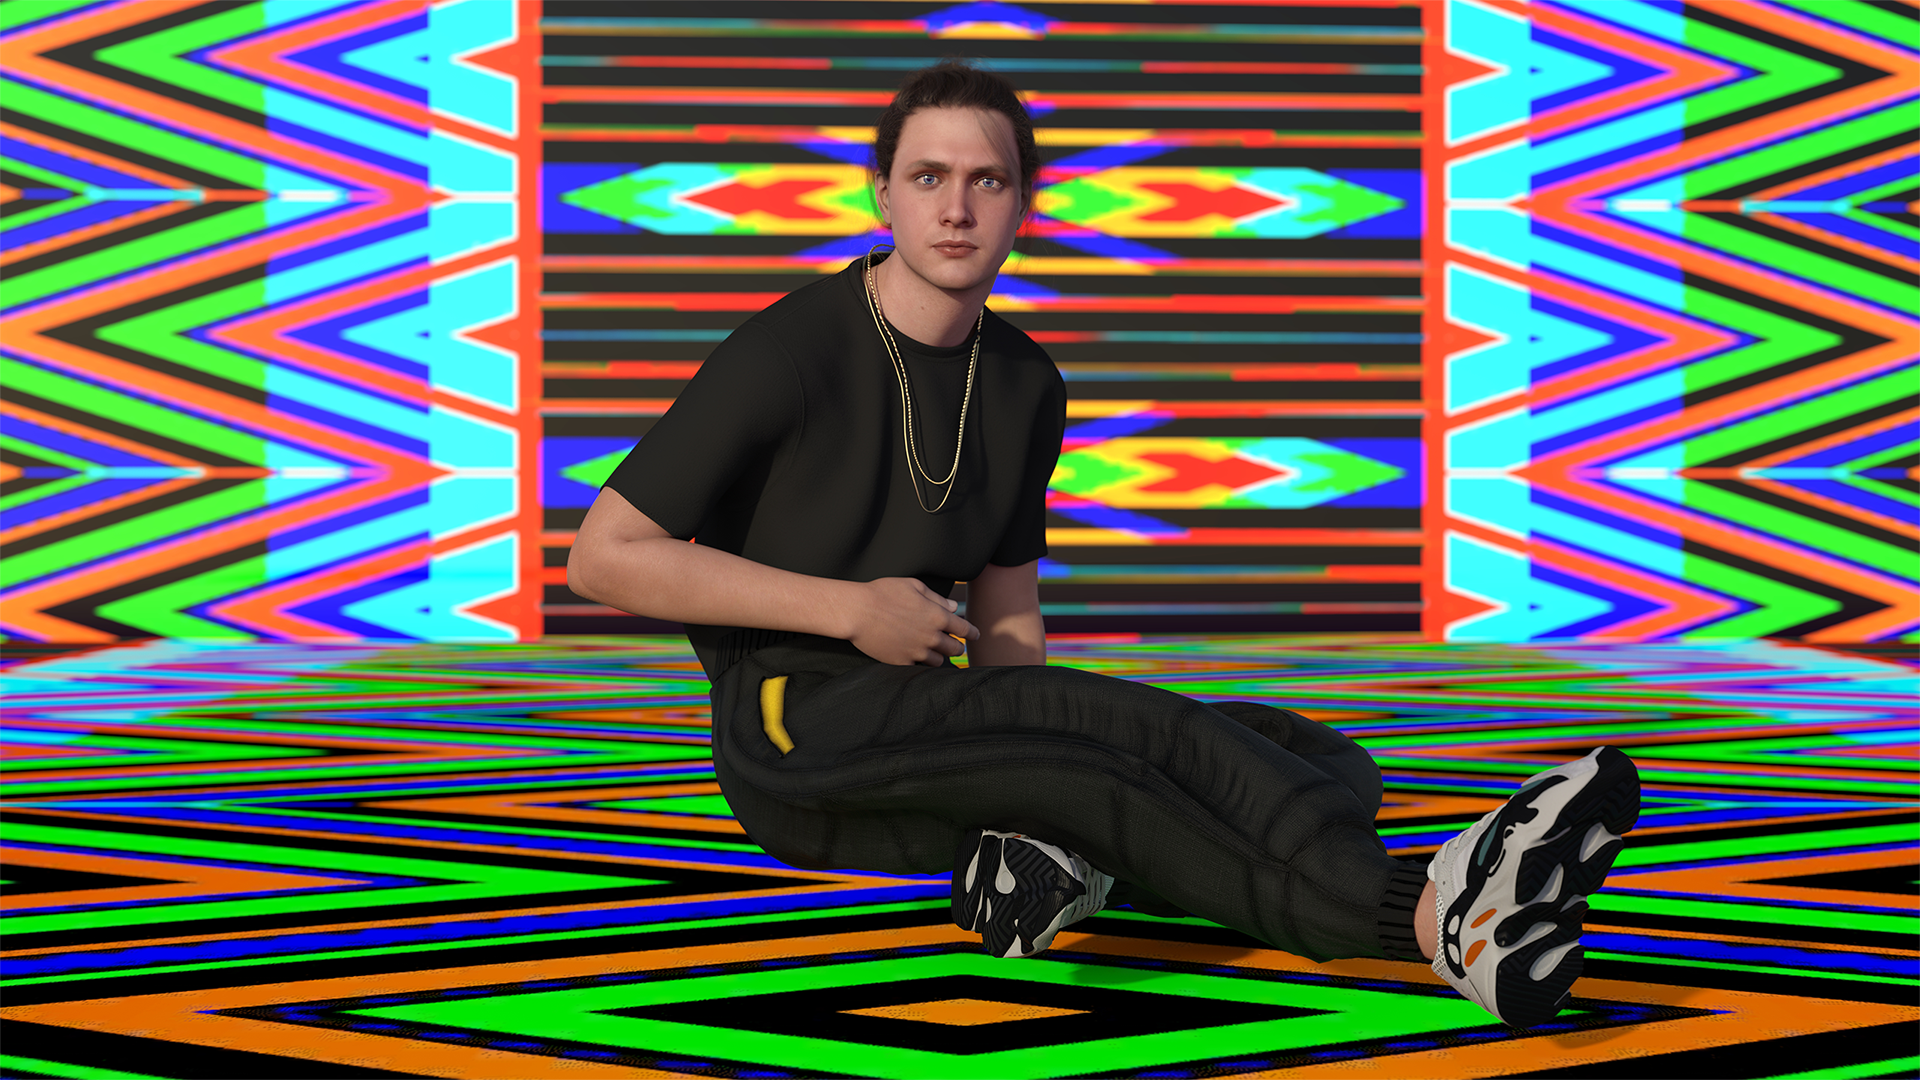 A bright colourful graphic image of a person with long straight hair pulled back sitting on the floor with multi coloured projections behind them